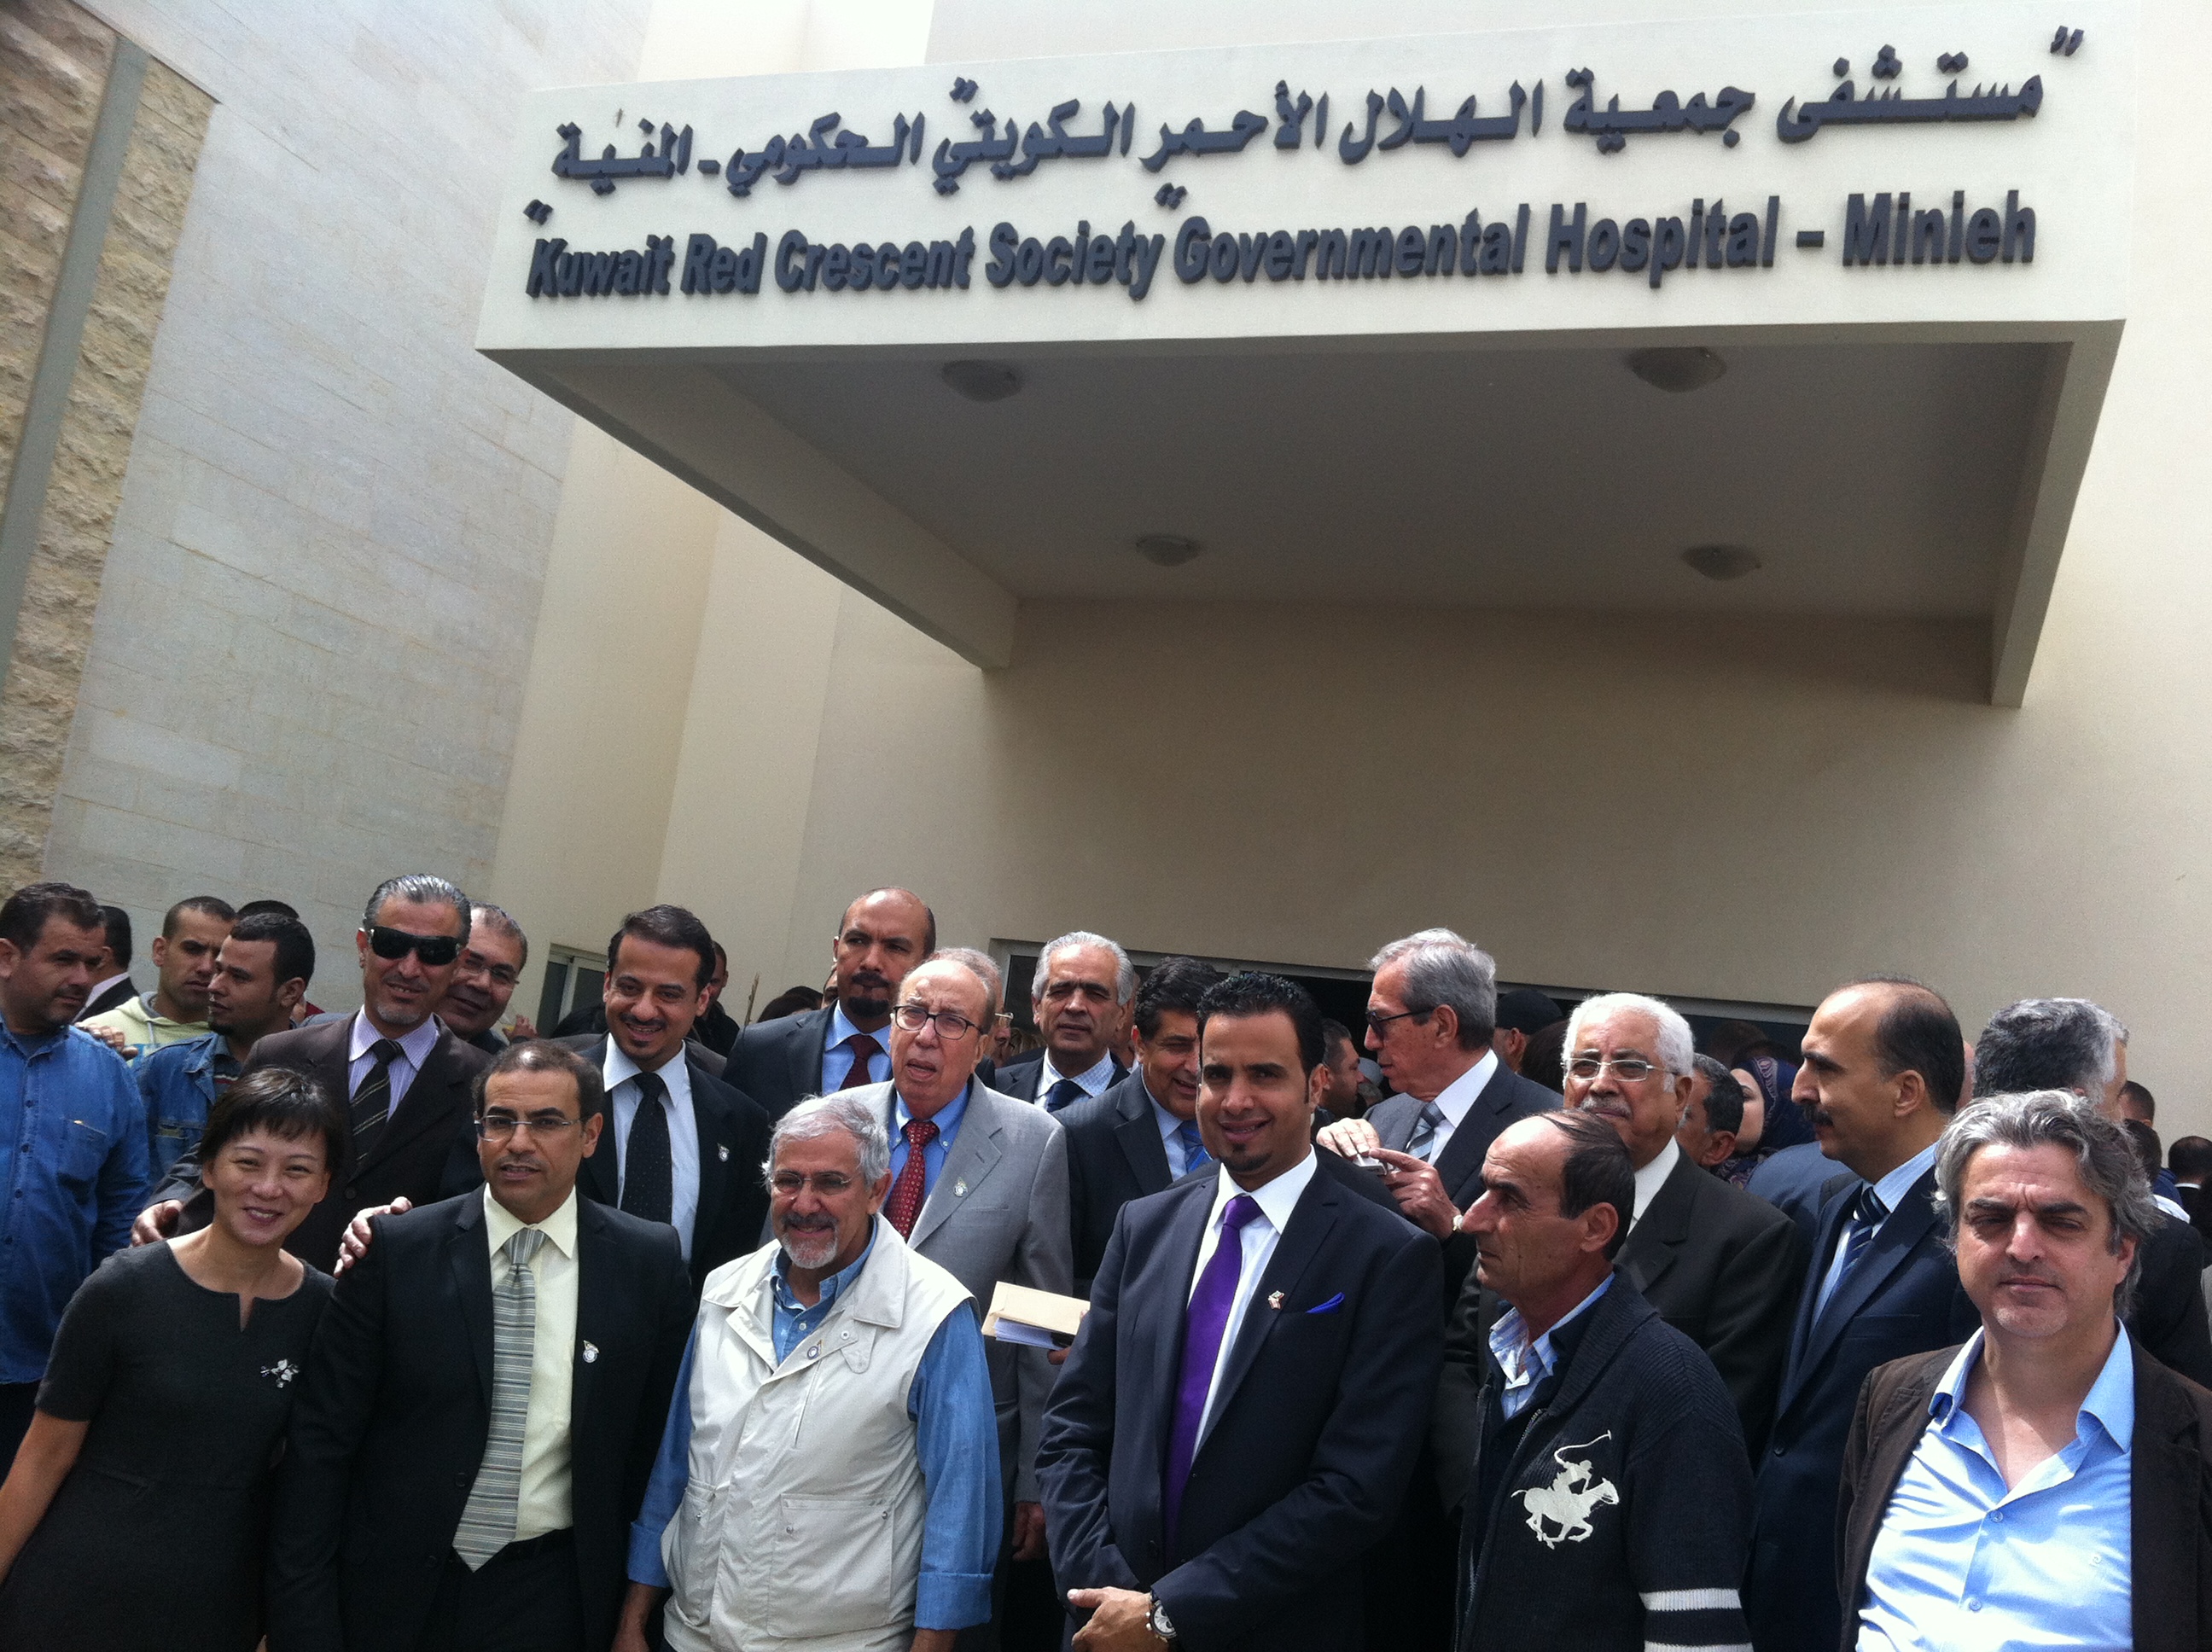 The opening of The Kuwait Red Crescent Society's (KRCS) Hospital in northern Lebanon